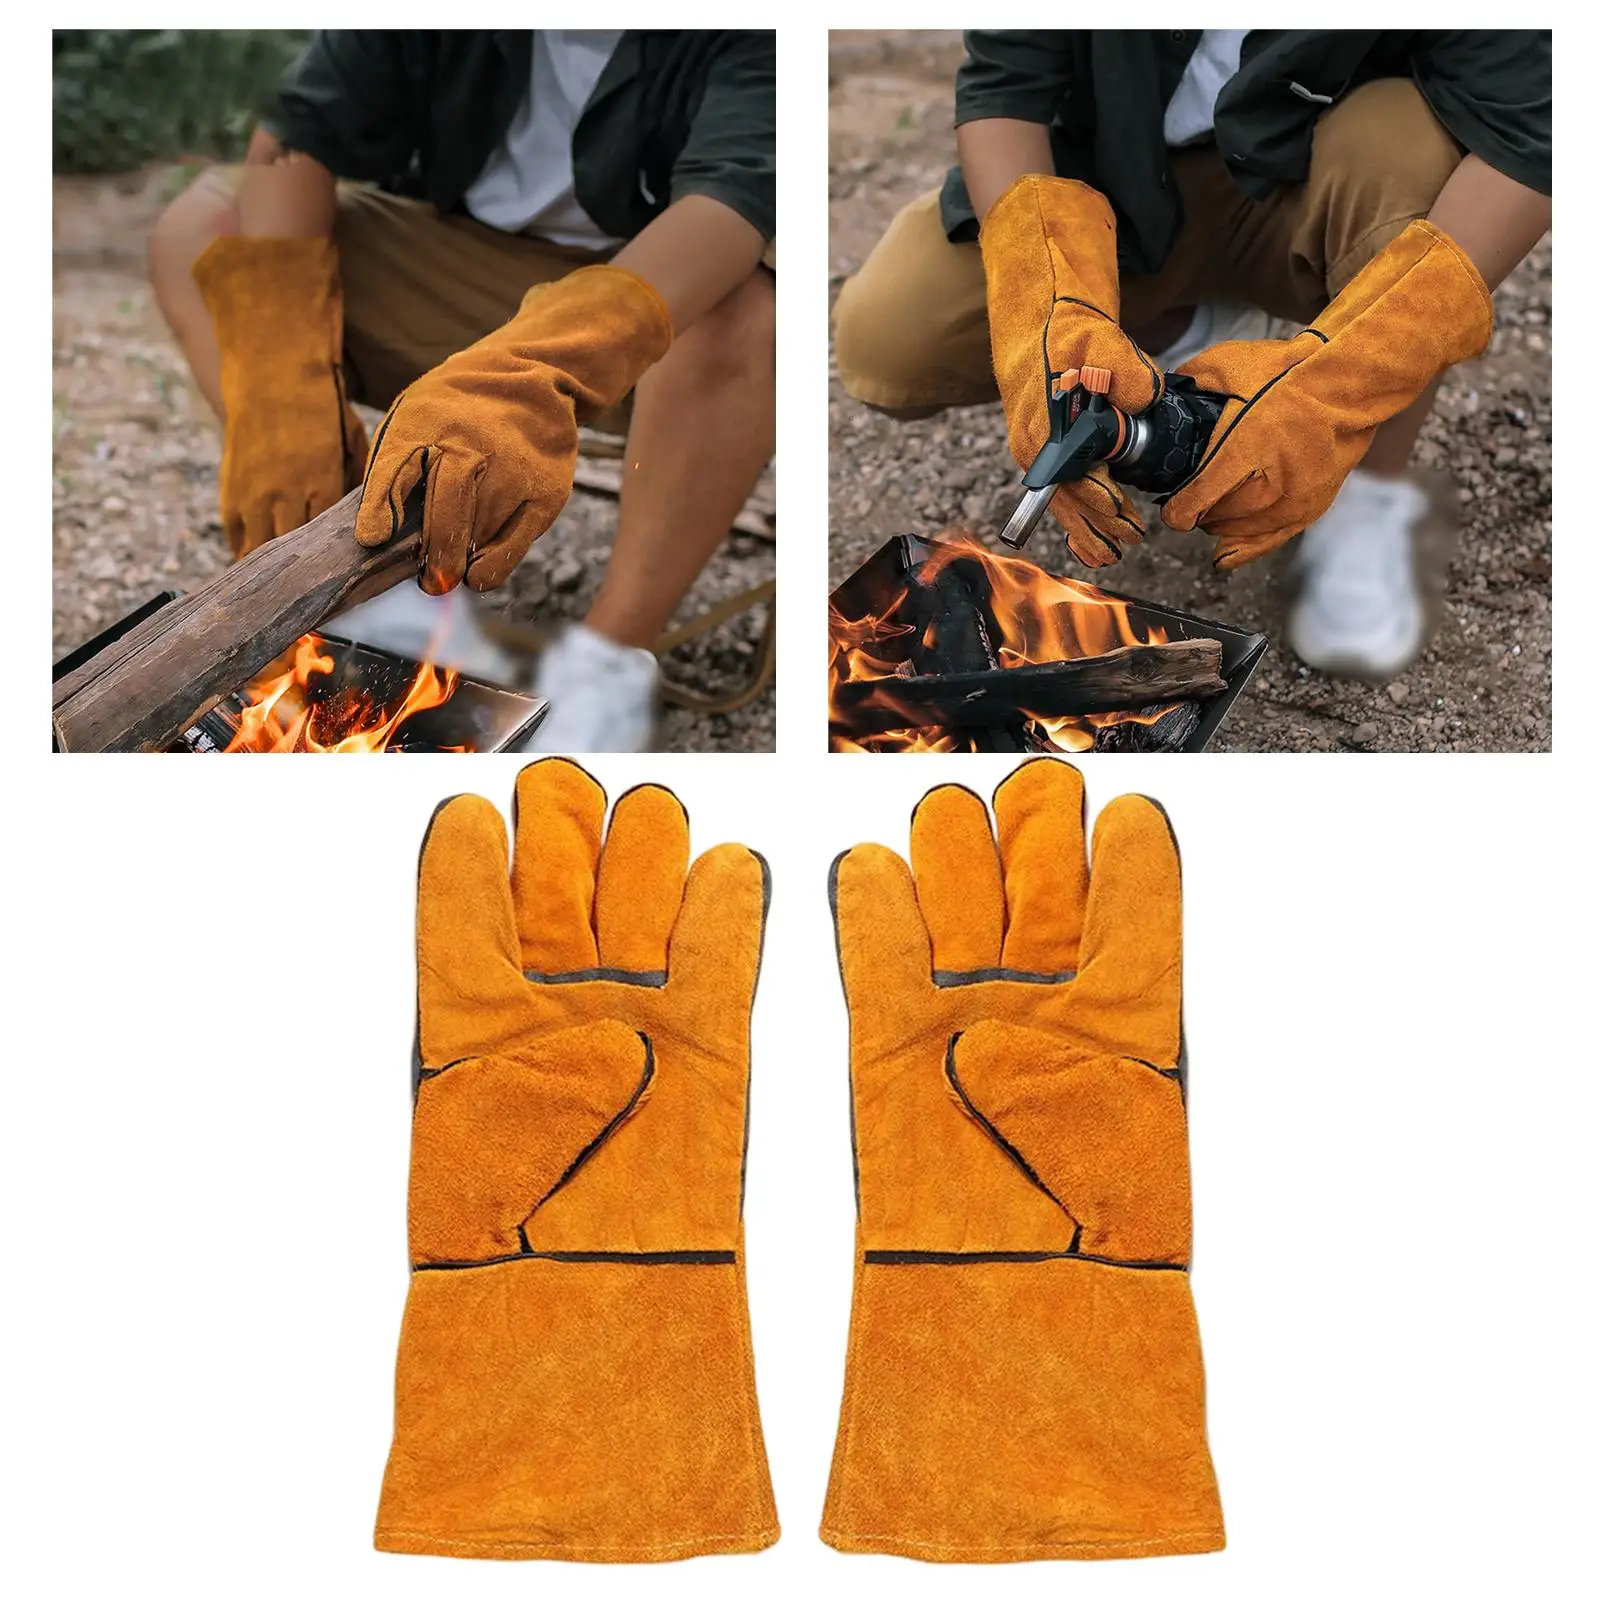 2 Pieces Heat Resistant Heat Resistant Gloves PU Leather Anti Slip BBQ Mitts Oven Gloves Grill Gloves for Heatproof Camping